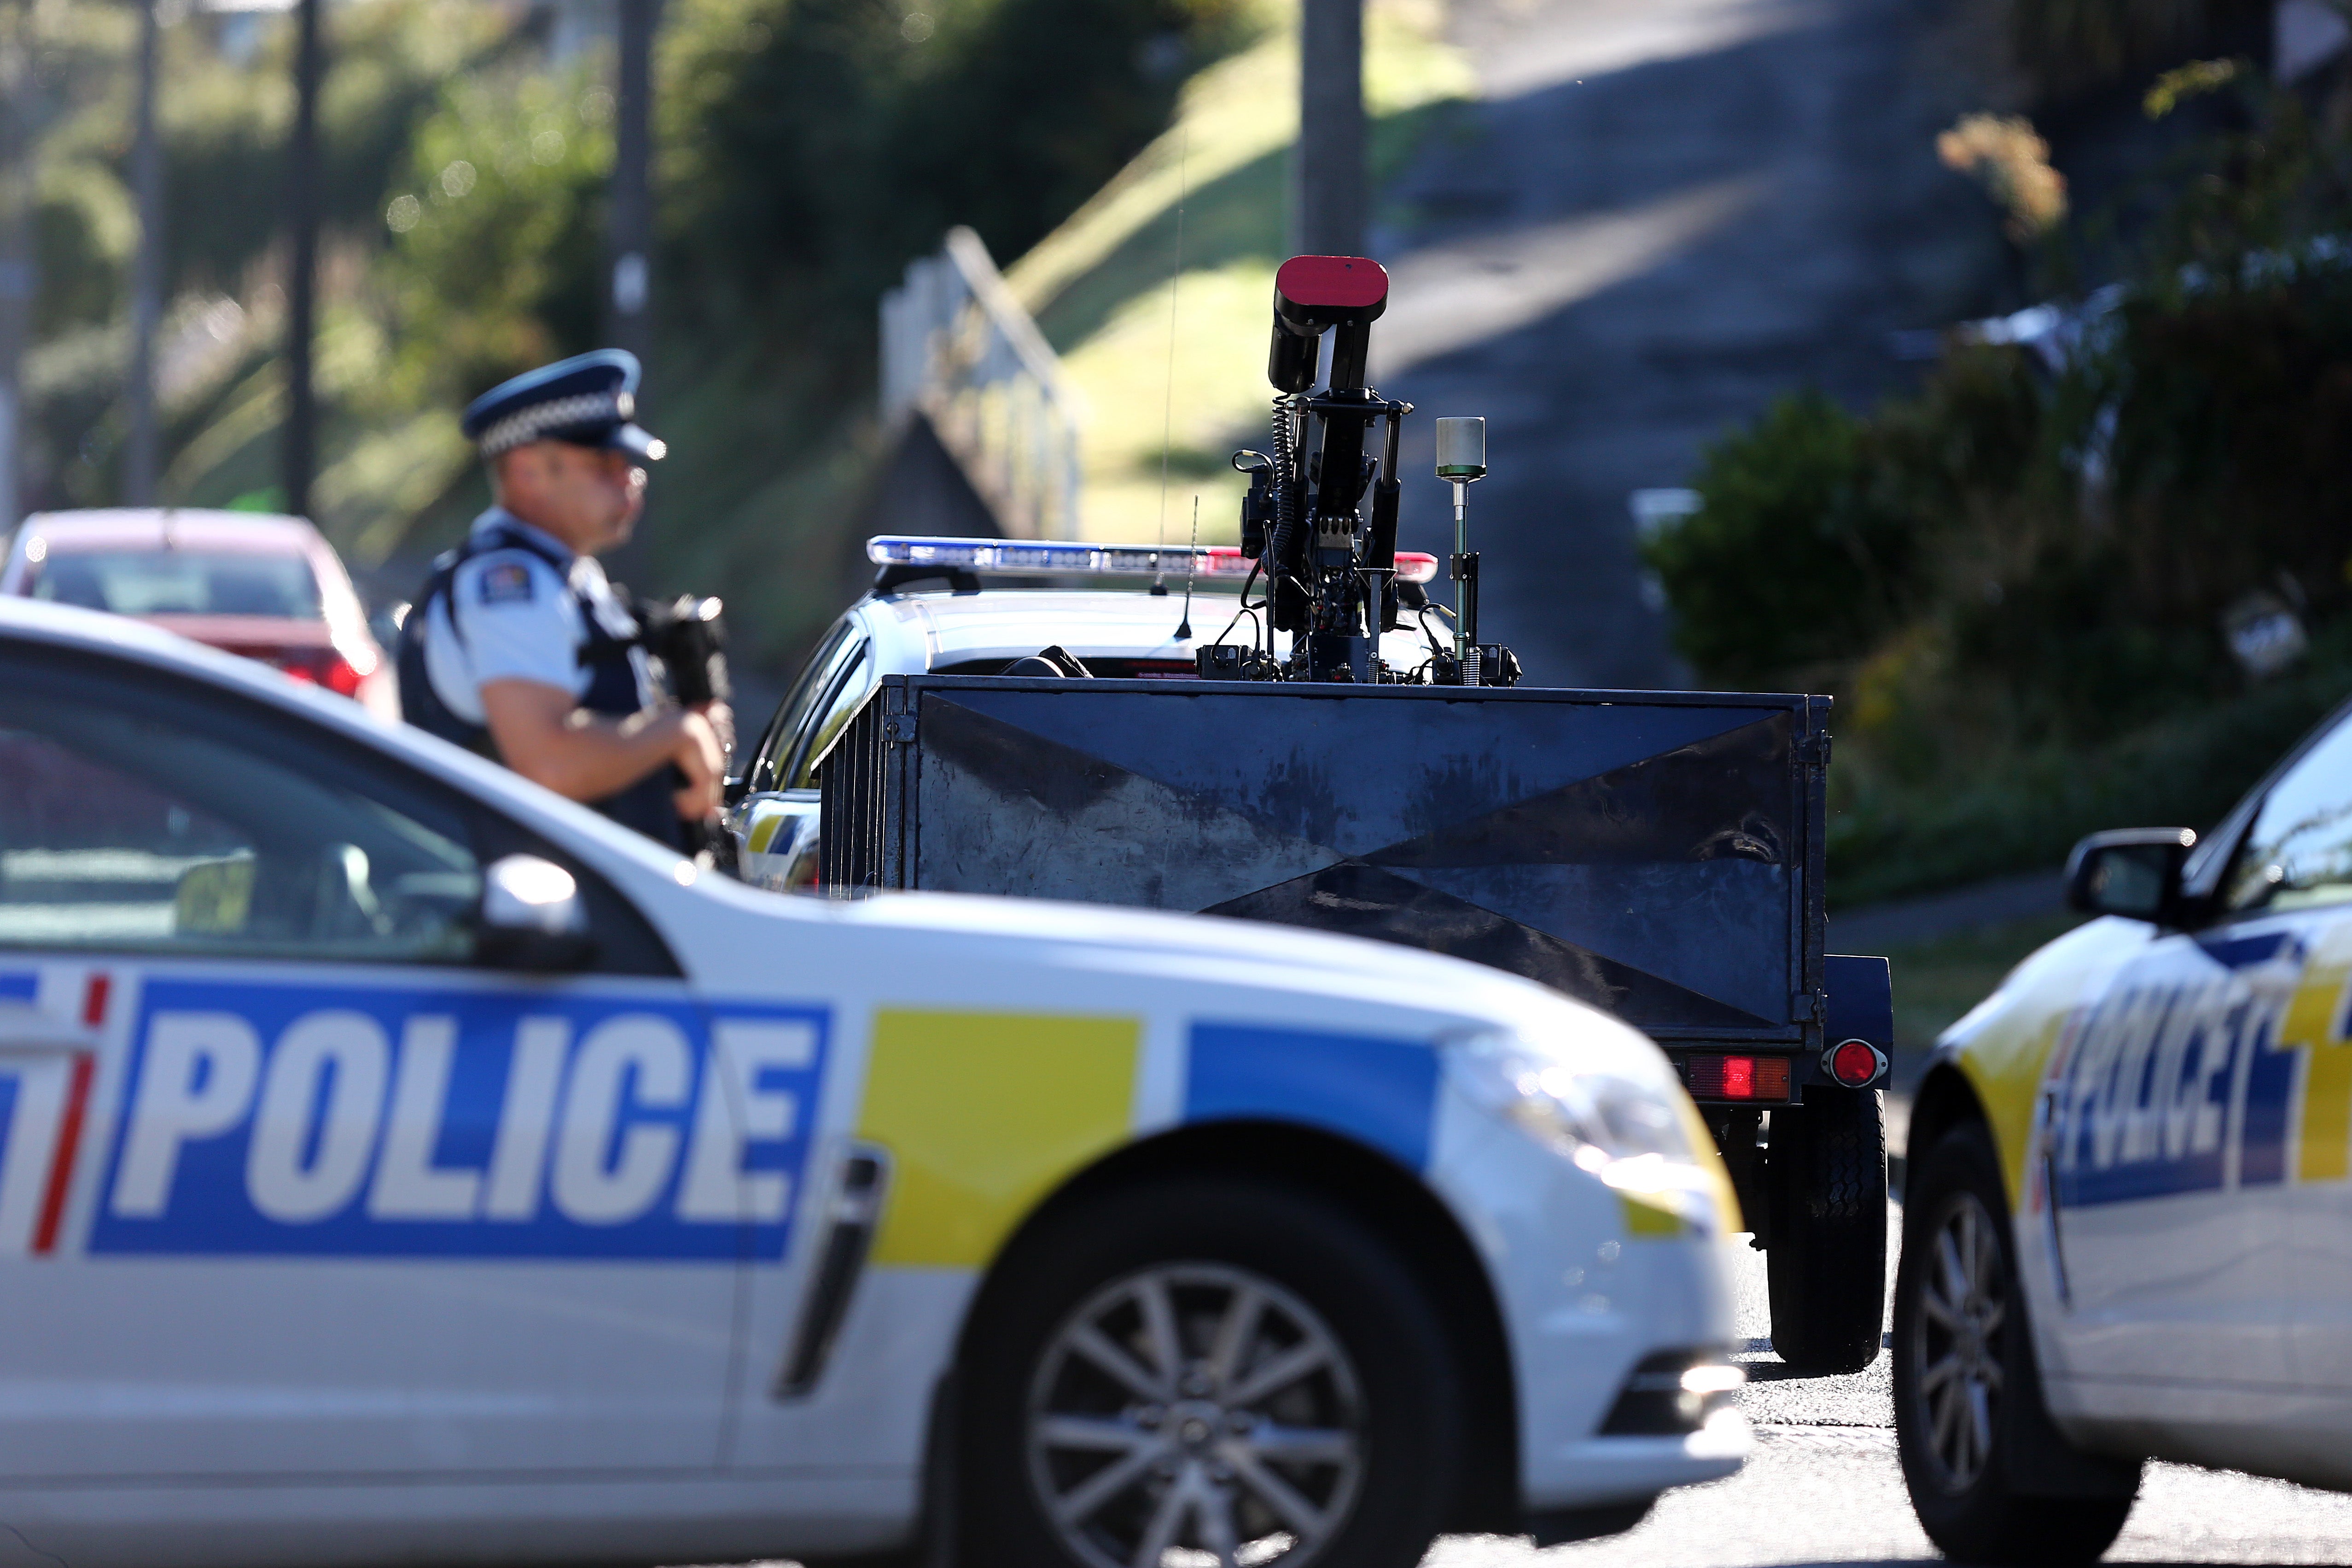 Police investigate a property in Dunedin, New Zealand on 16 March, 2019.